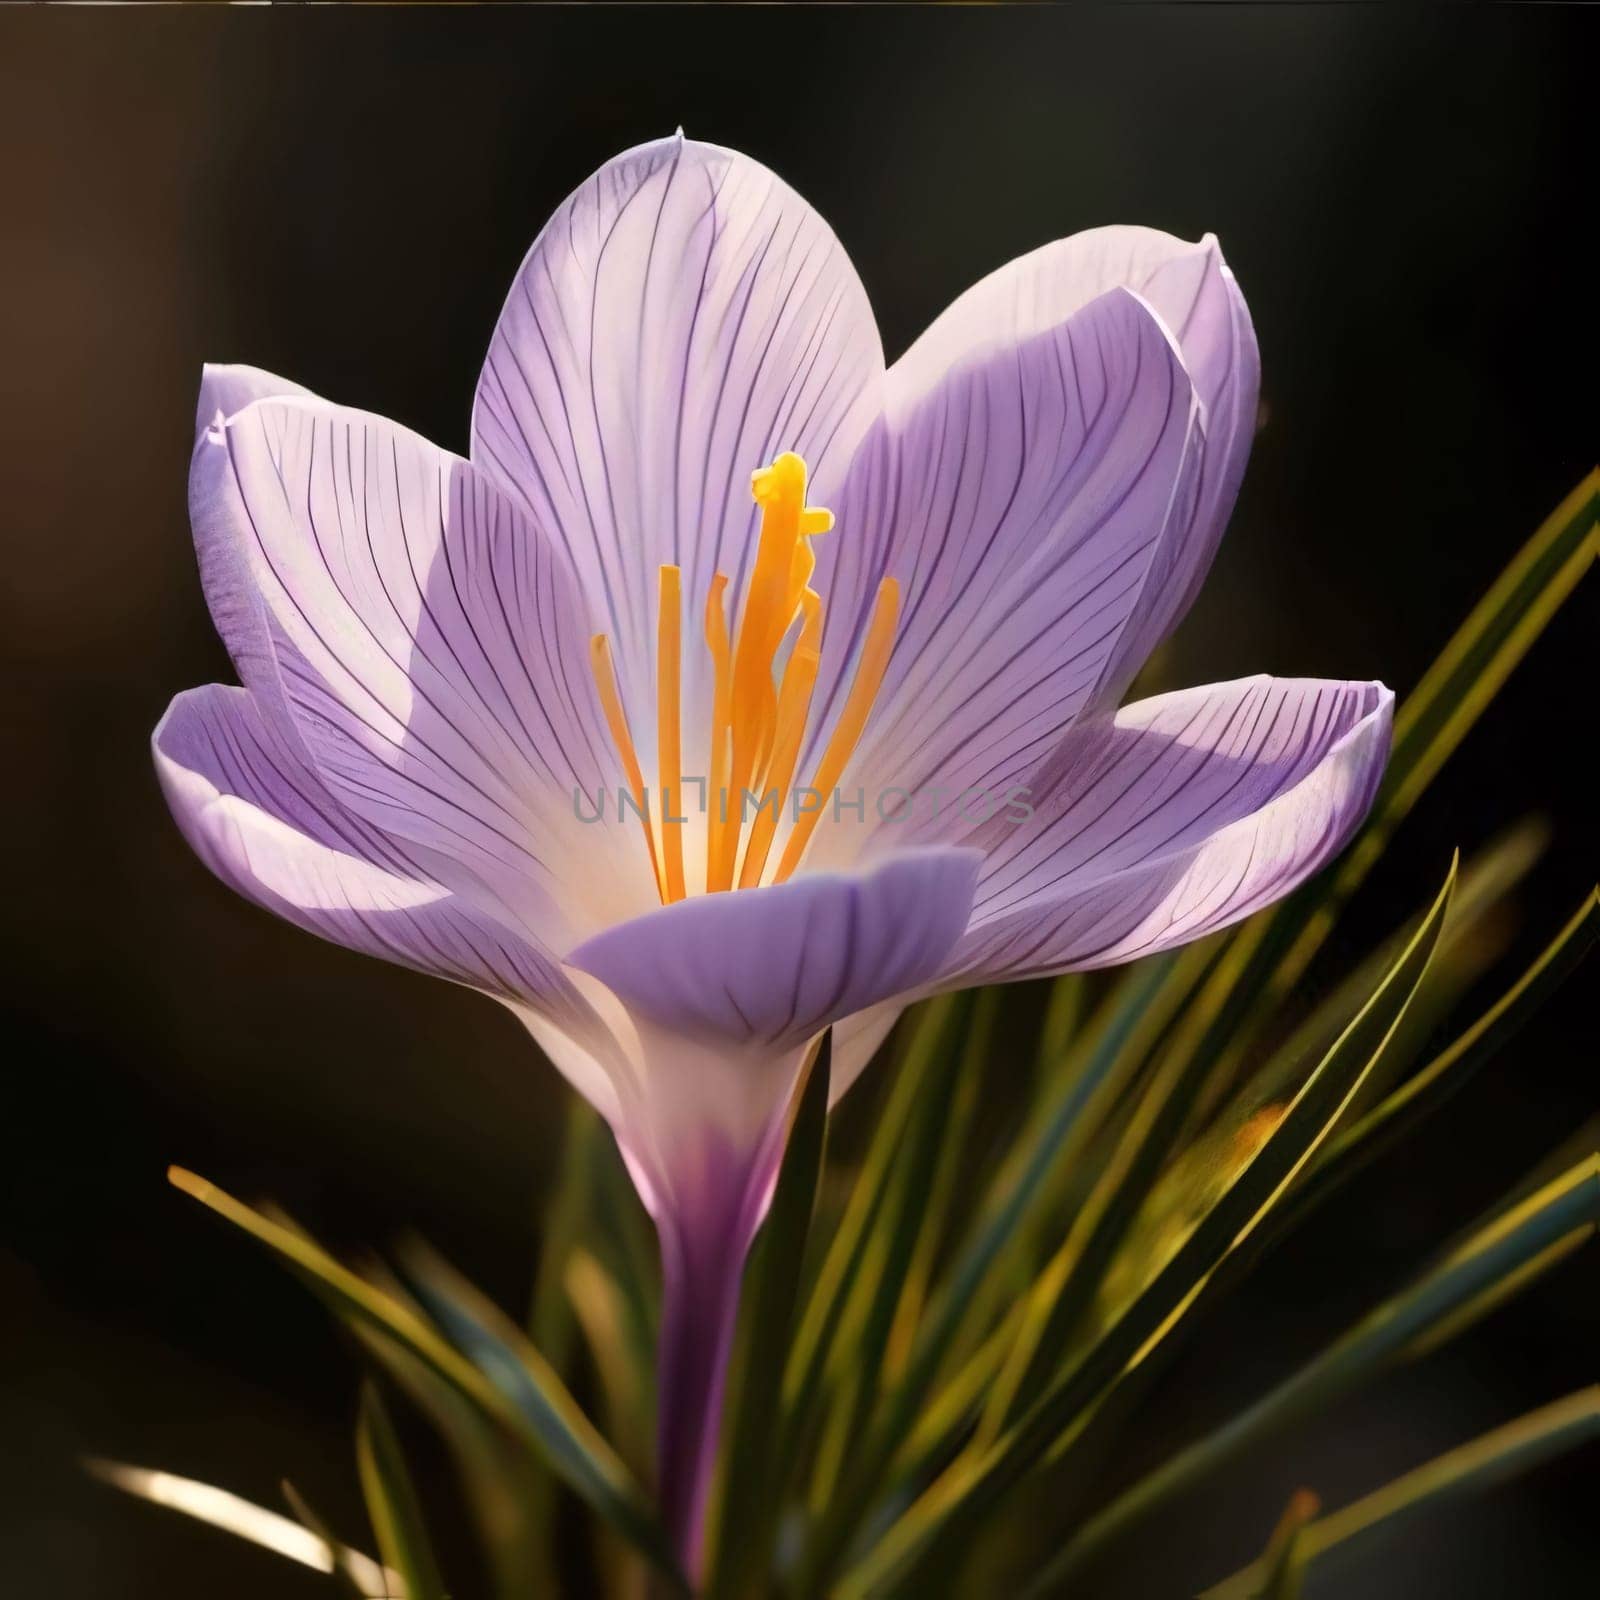 Purple flower with petals on a dark background. Flowering flowers, a symbol of spring, new life. A joyful time of nature waking up to life.